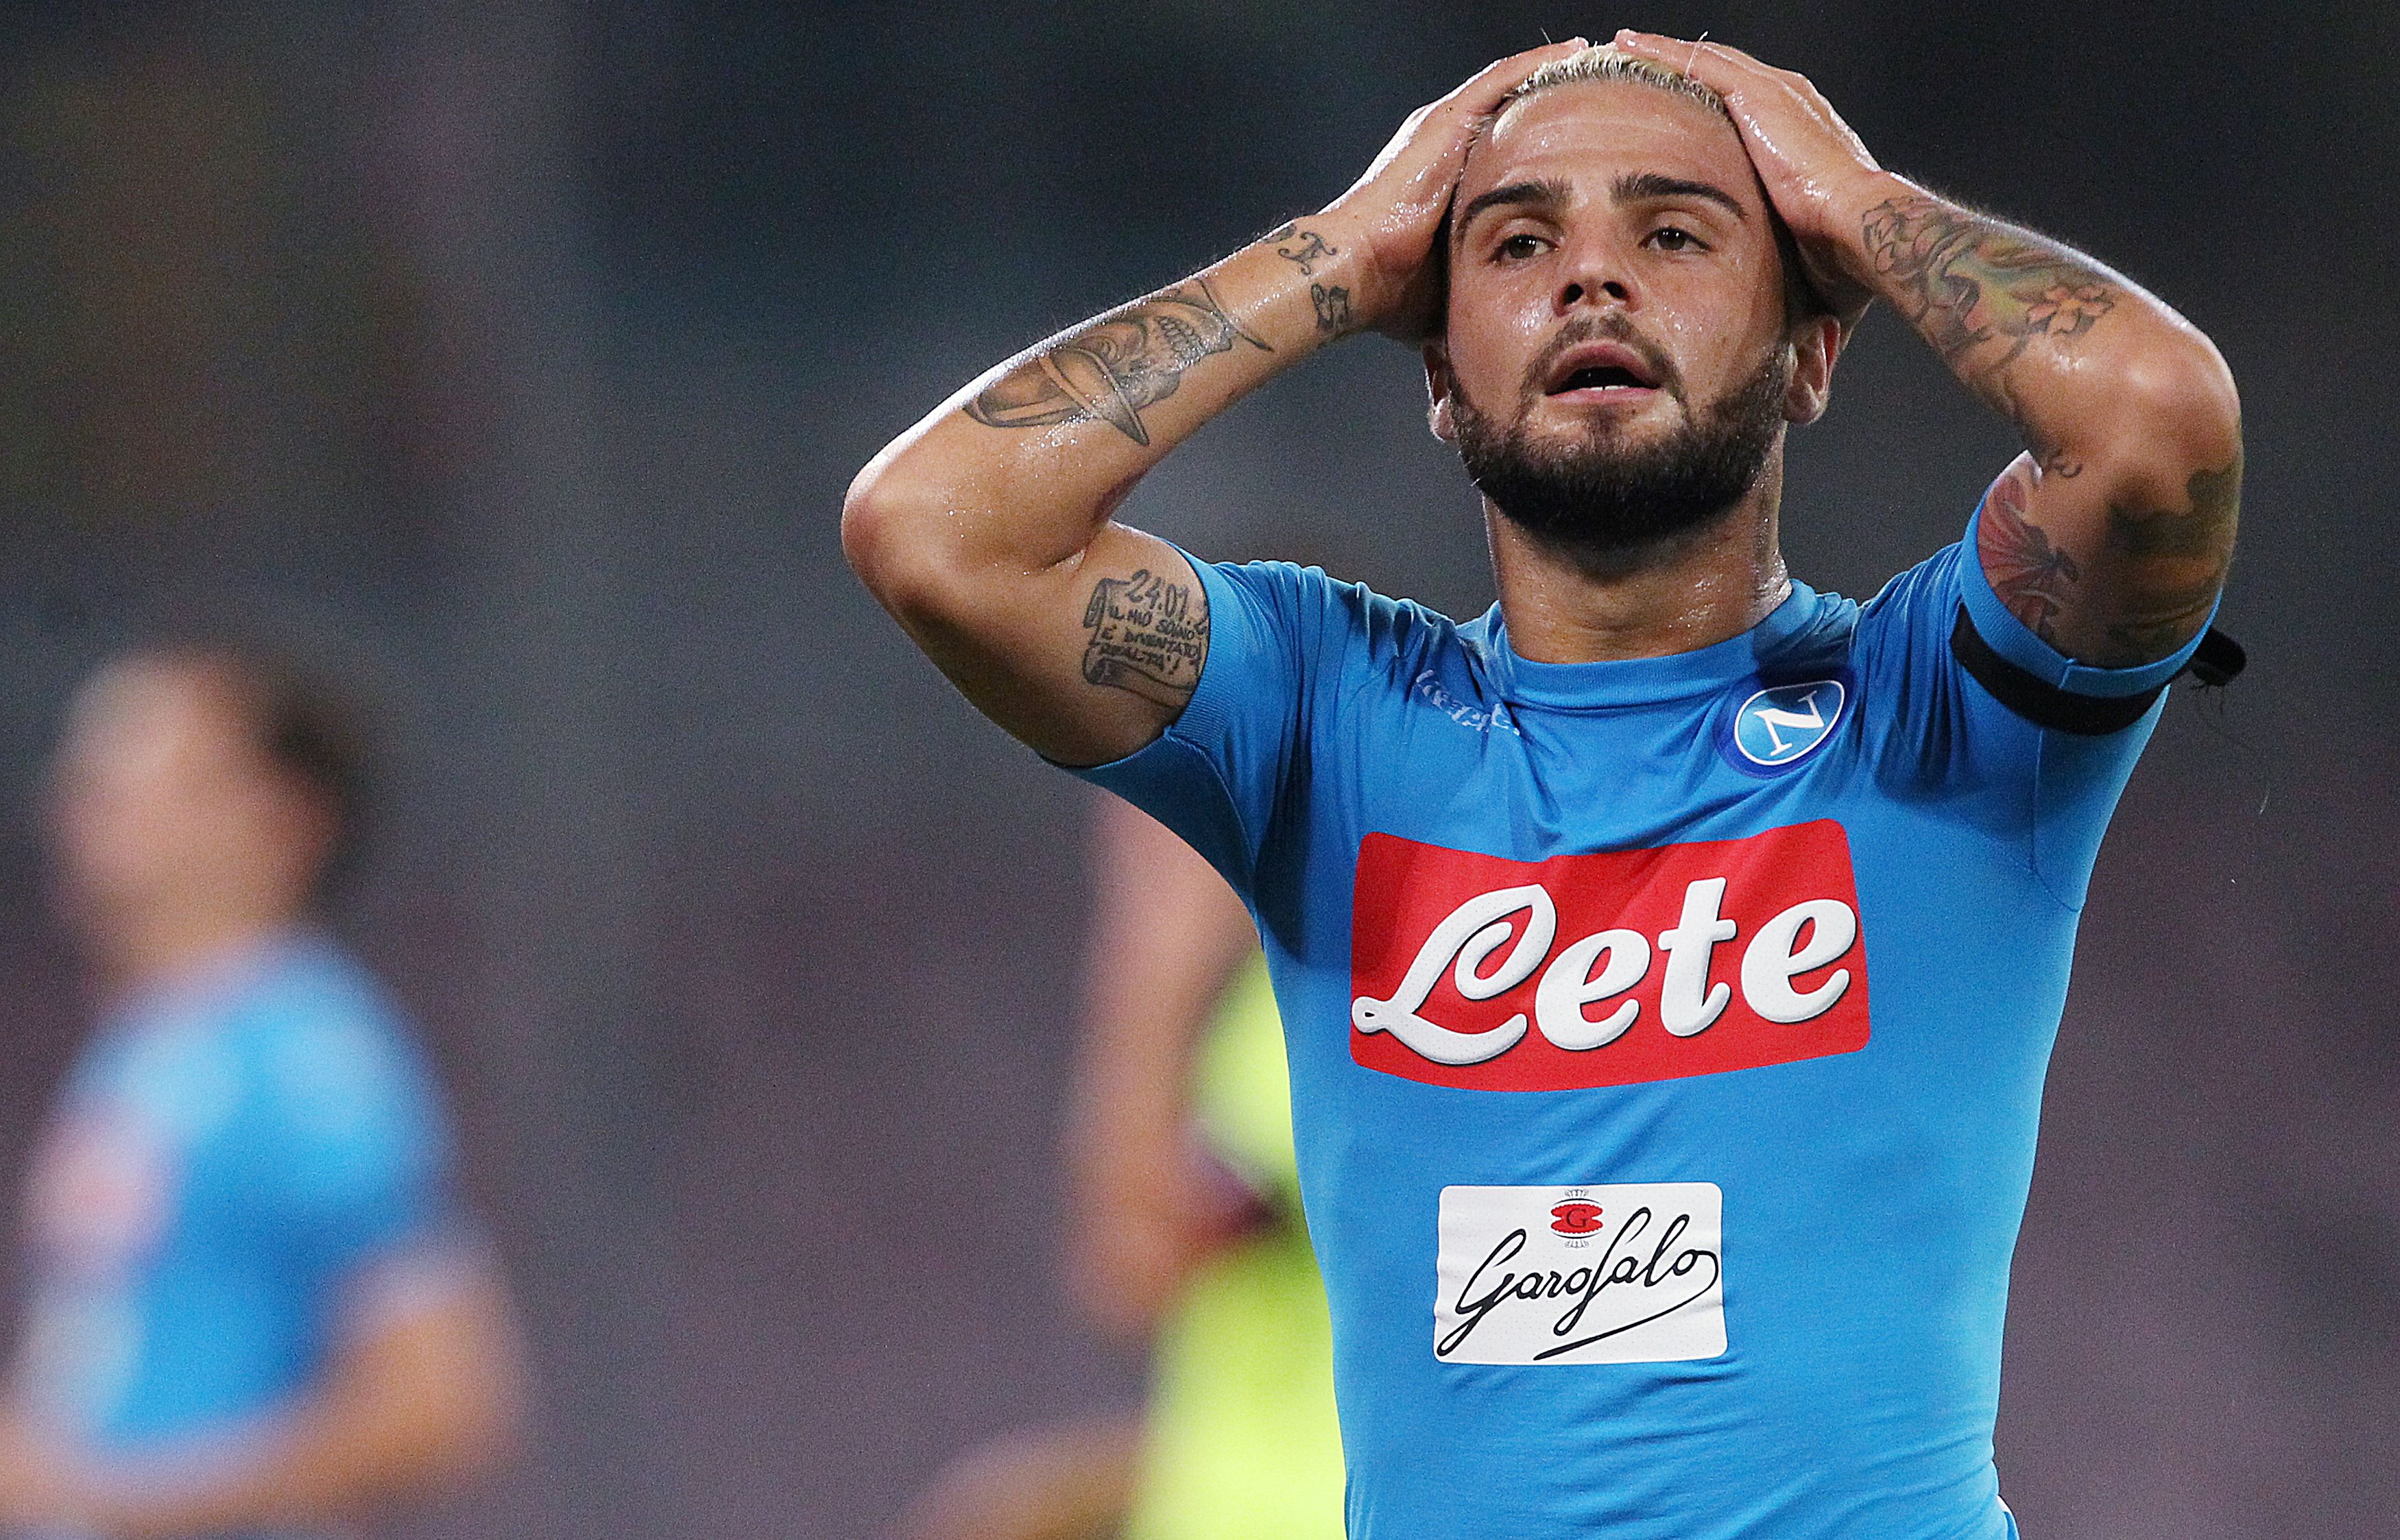 Napoli's Italian forward Lorenzo Insigne reacts after missing a goal during the Italian Serie A football match SSC Napoli vs Bologna FC on September 17 2016 at the San Paolo stadium in Naples. / AFP / CARLO HERMANN        (Photo credit should read CARLO HERMANN/AFP/Getty Images)